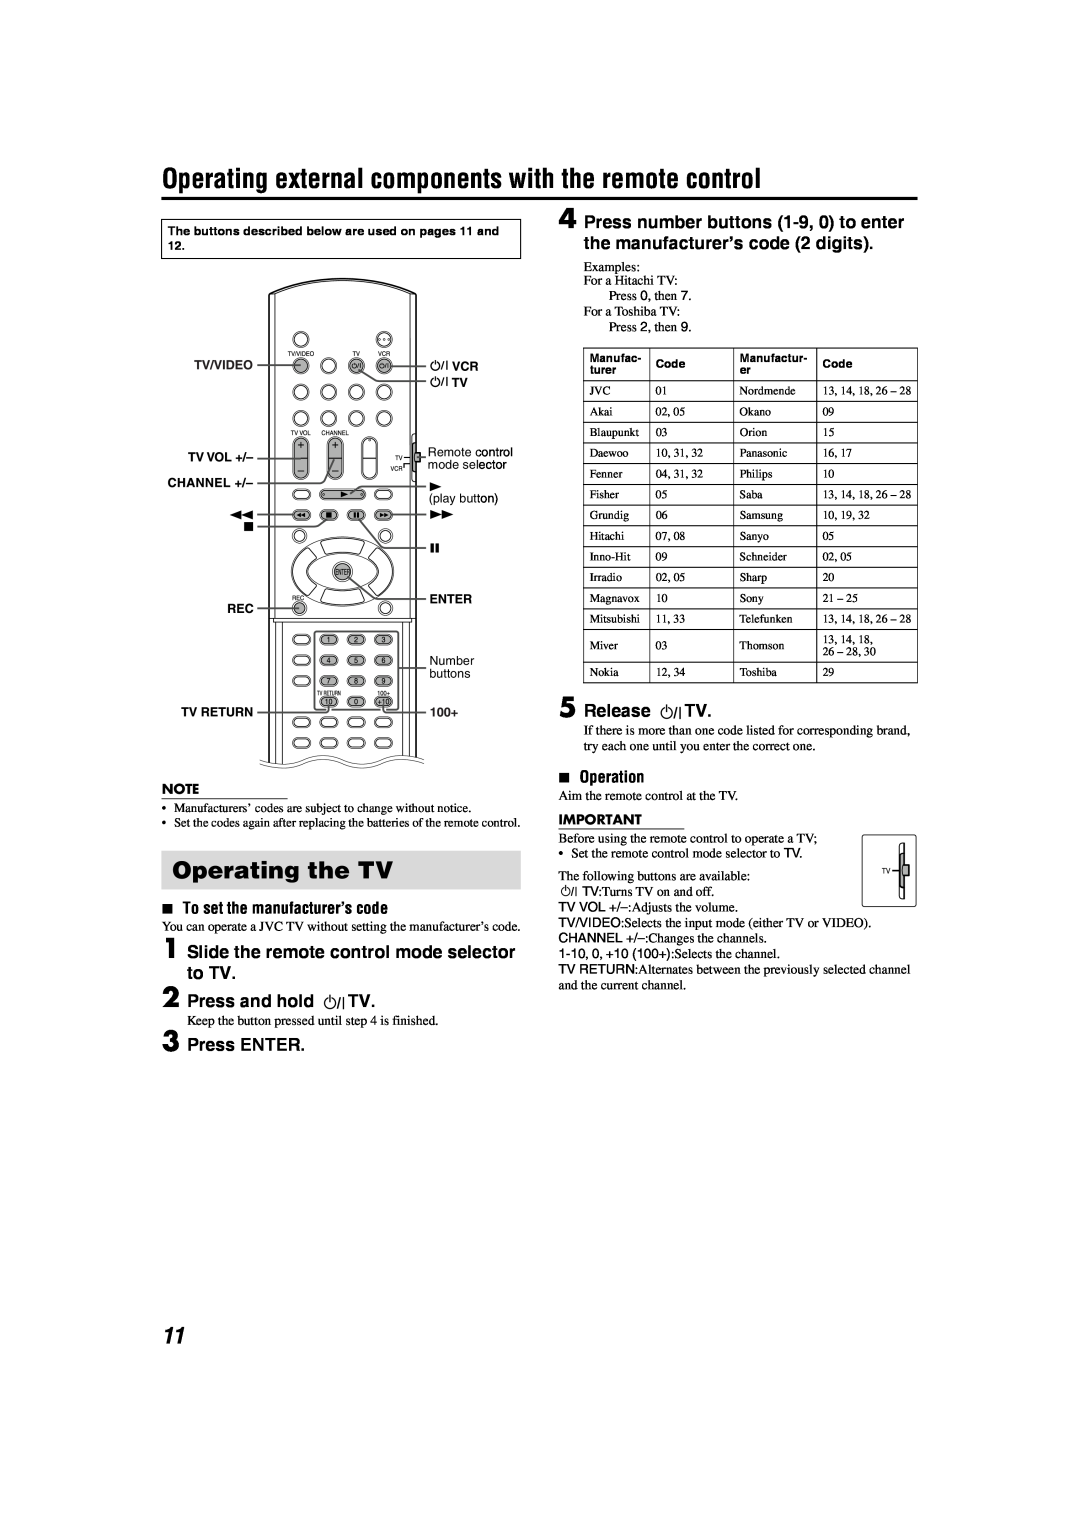 JVC SP-THS1S Operating the TV, Slide the remote control mode selector to TV, Press and hold TV, Press ENTER, Release TV 